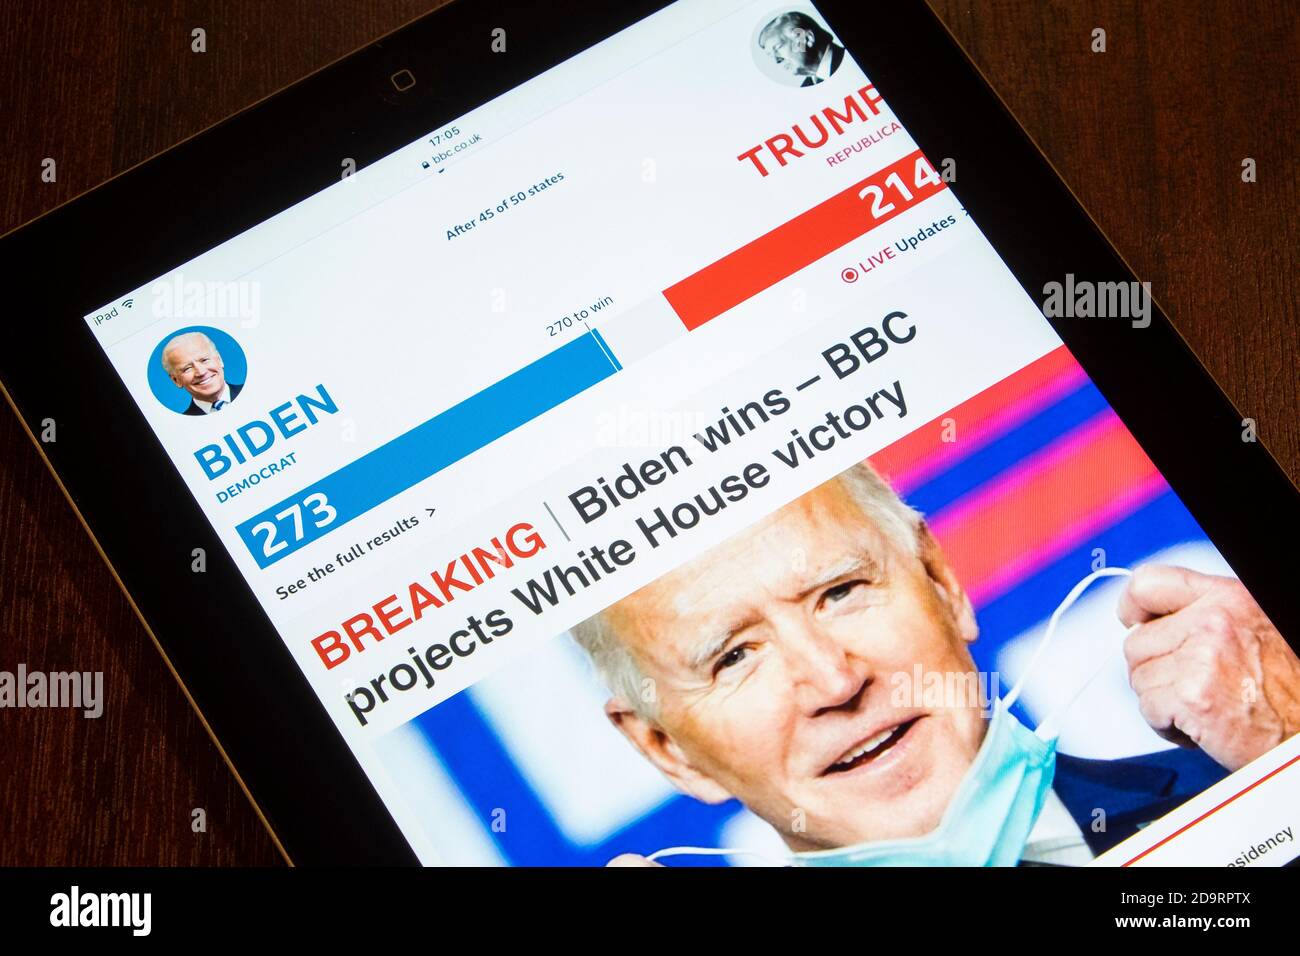 Chippenham, Wiltshire, UK. 7th November, 2020. An article on the BBC News website declaring that Joe Biden has won the 2020 US Presidential election is pictured being viewed on an iPad in Chippenham, Wiltshire. Credit: Lynchpics/Alamy Live News Stock Photo